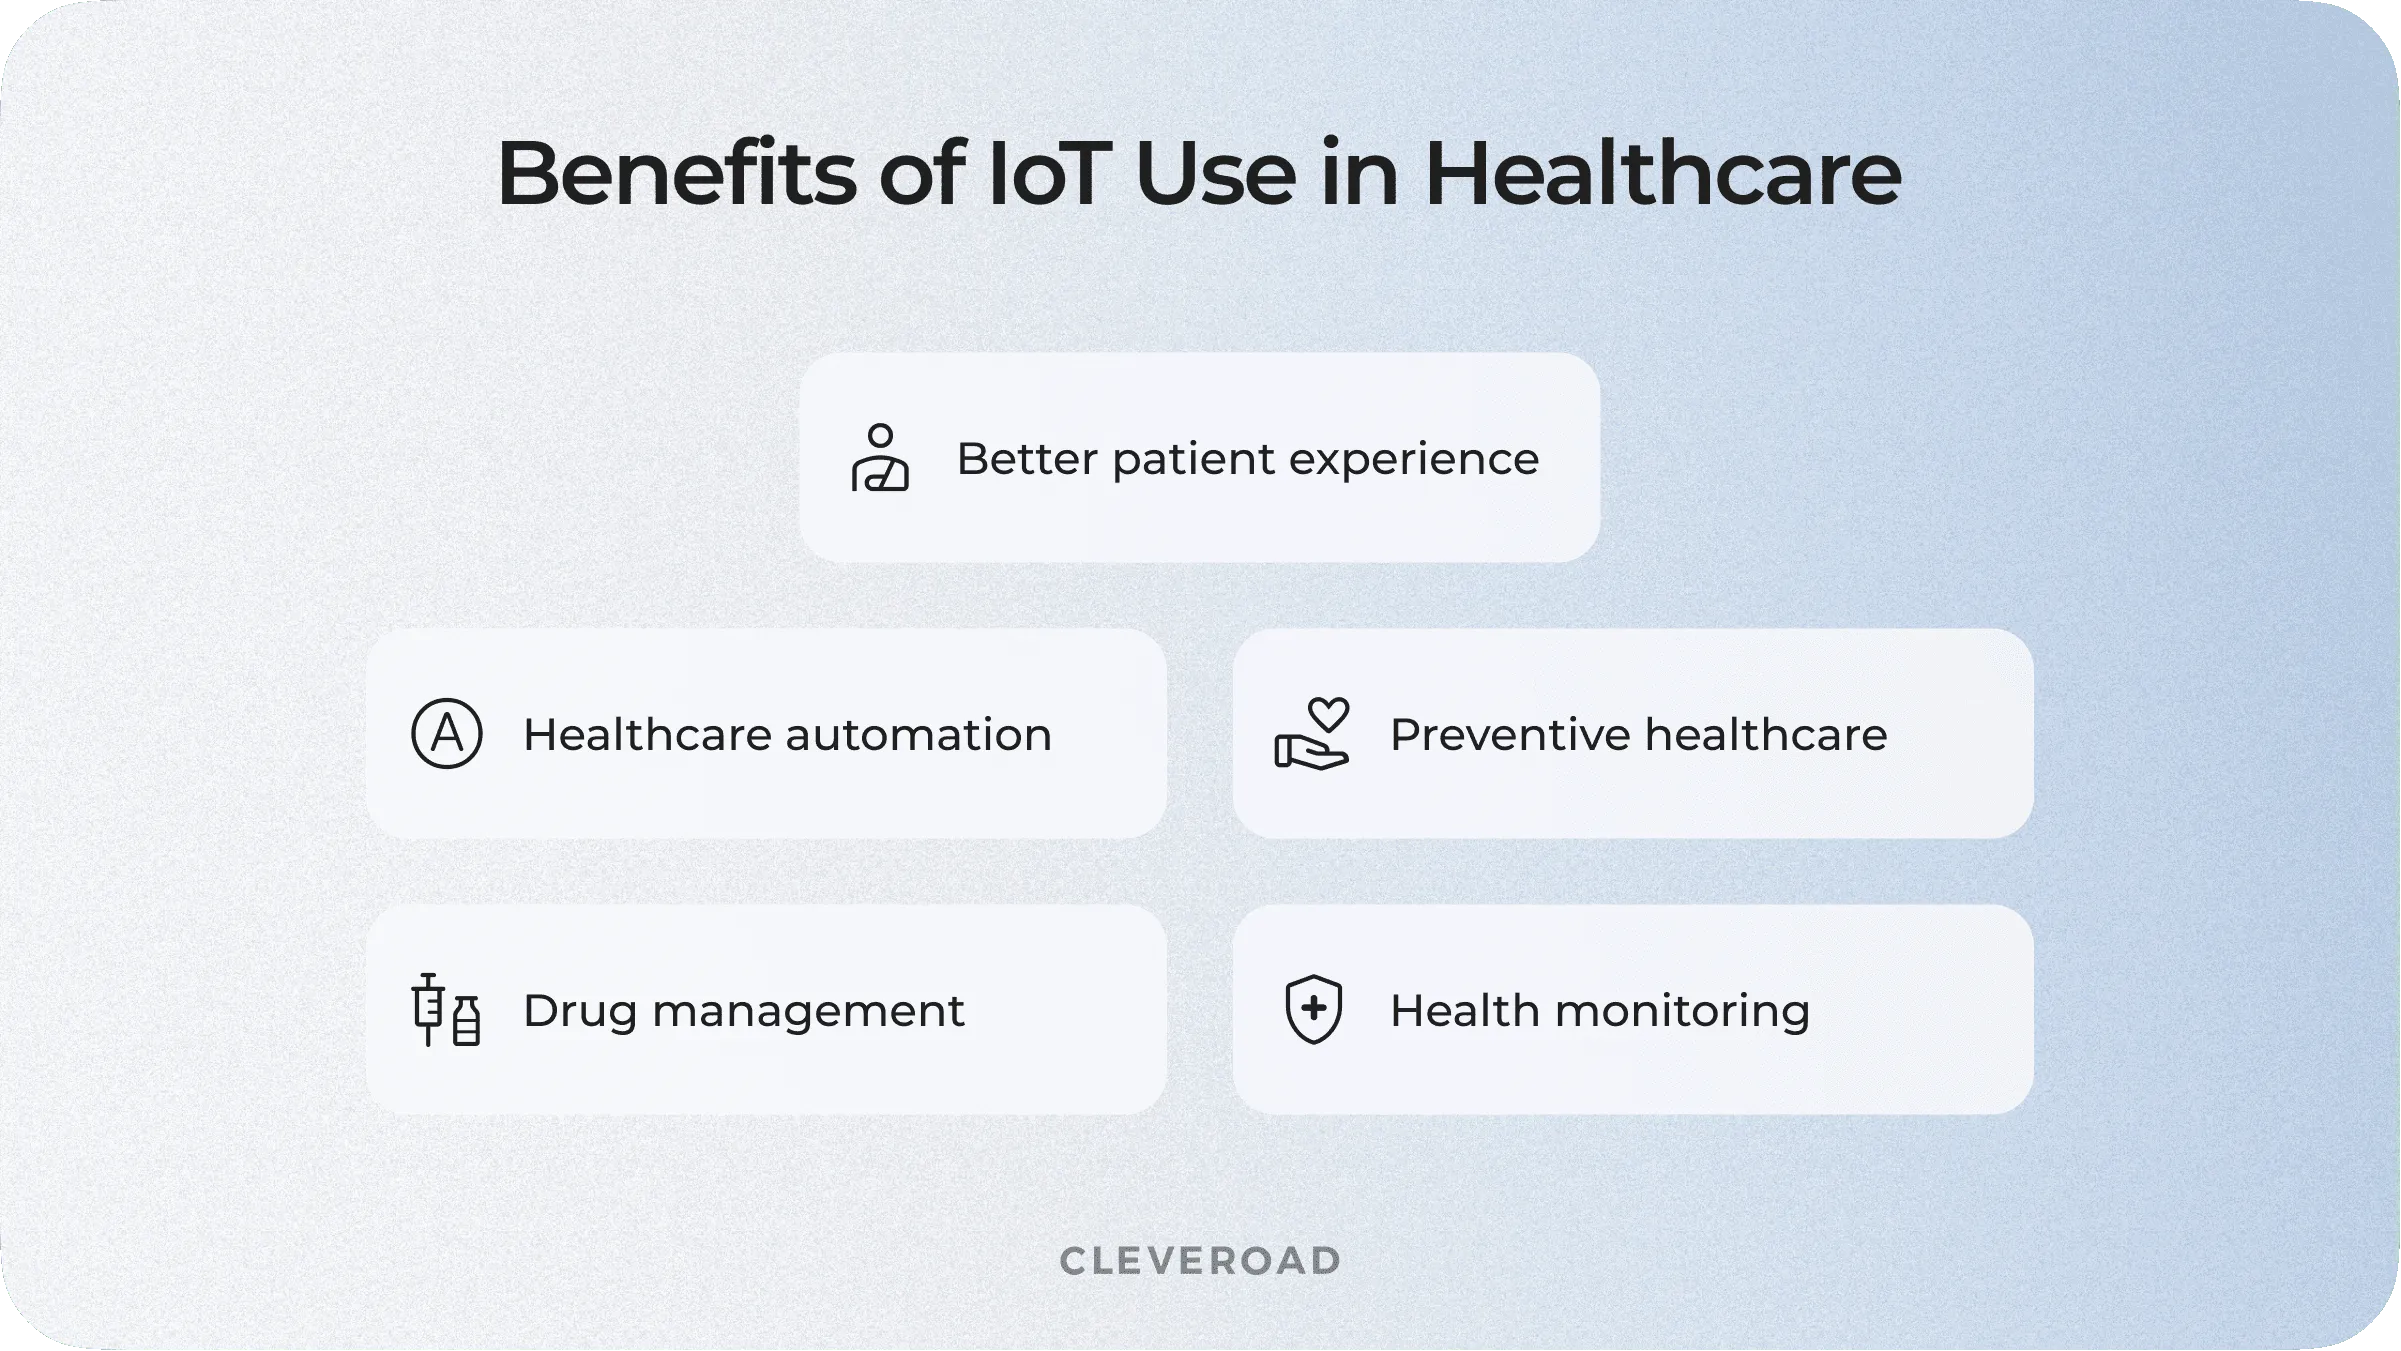 Use benefits of IoT in healthcare